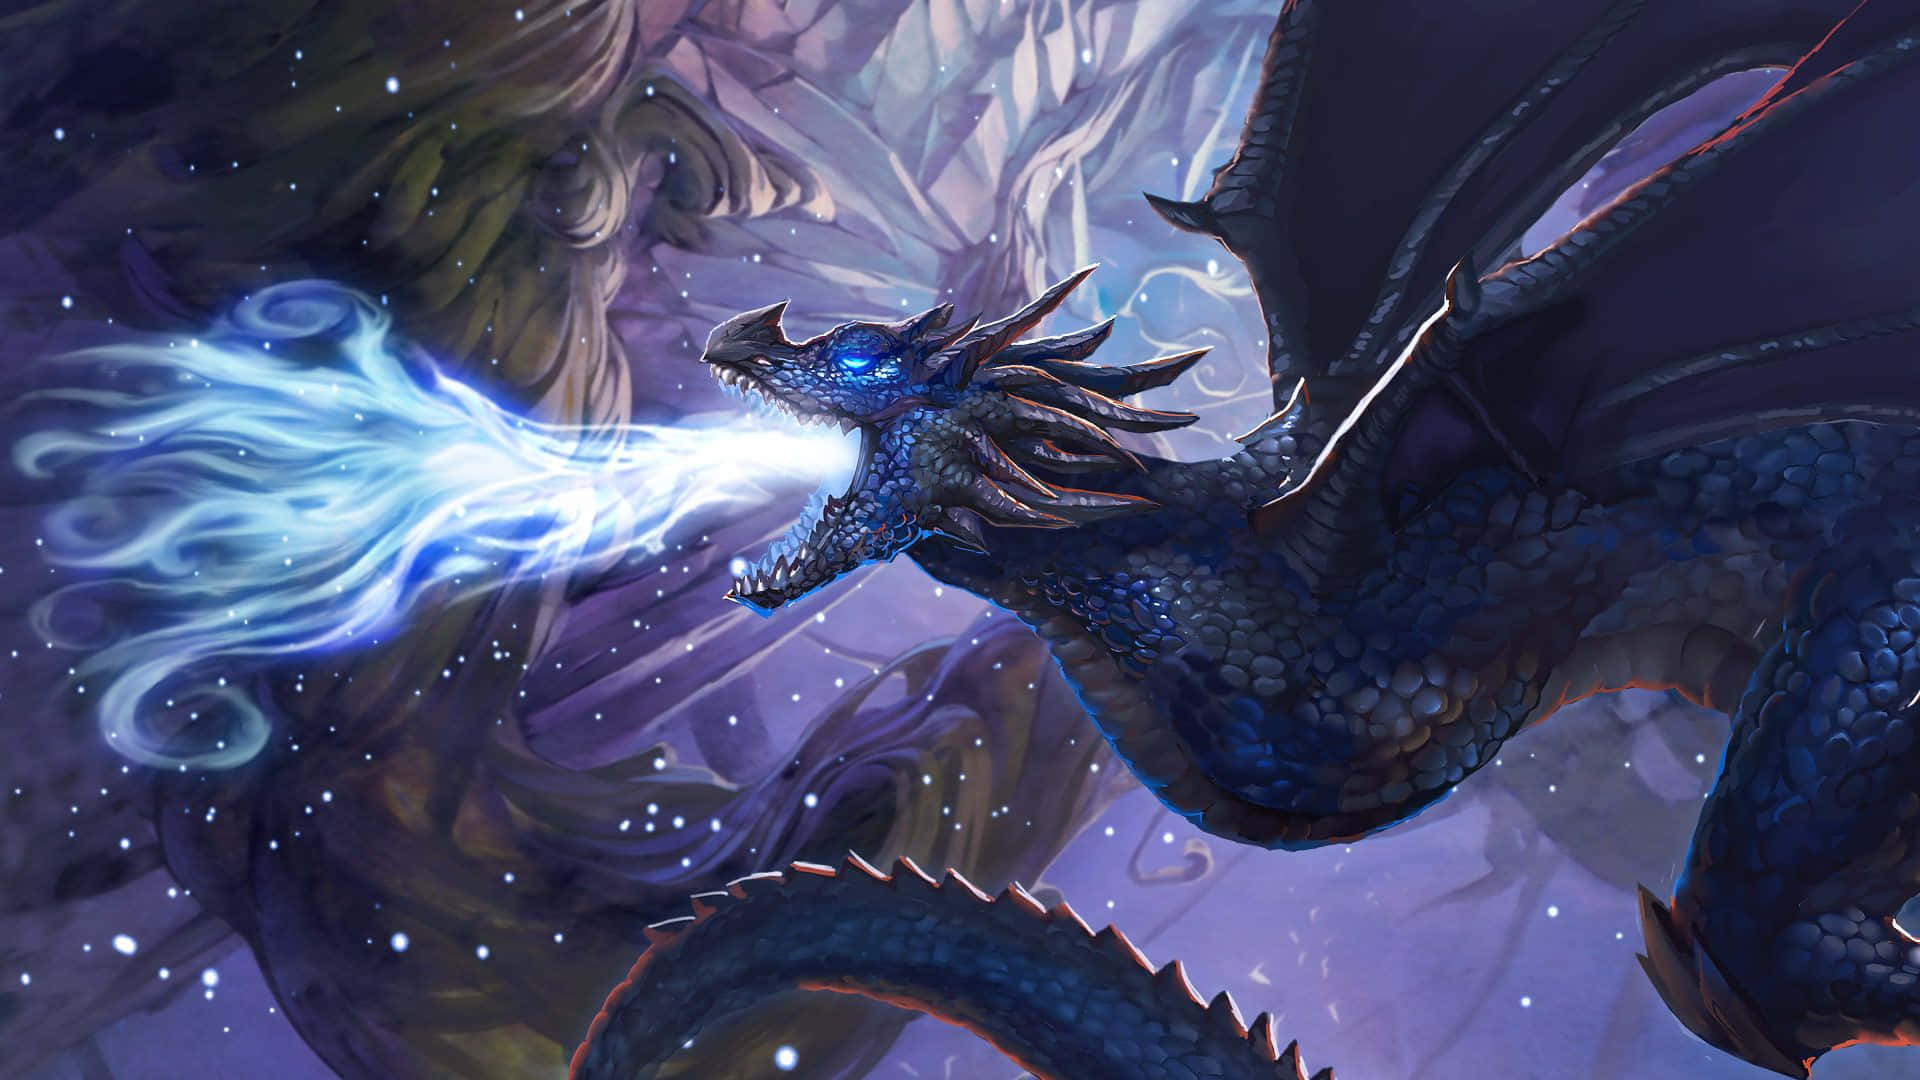 "The Real Dragon, A Creature of Mystical Power" Wallpaper